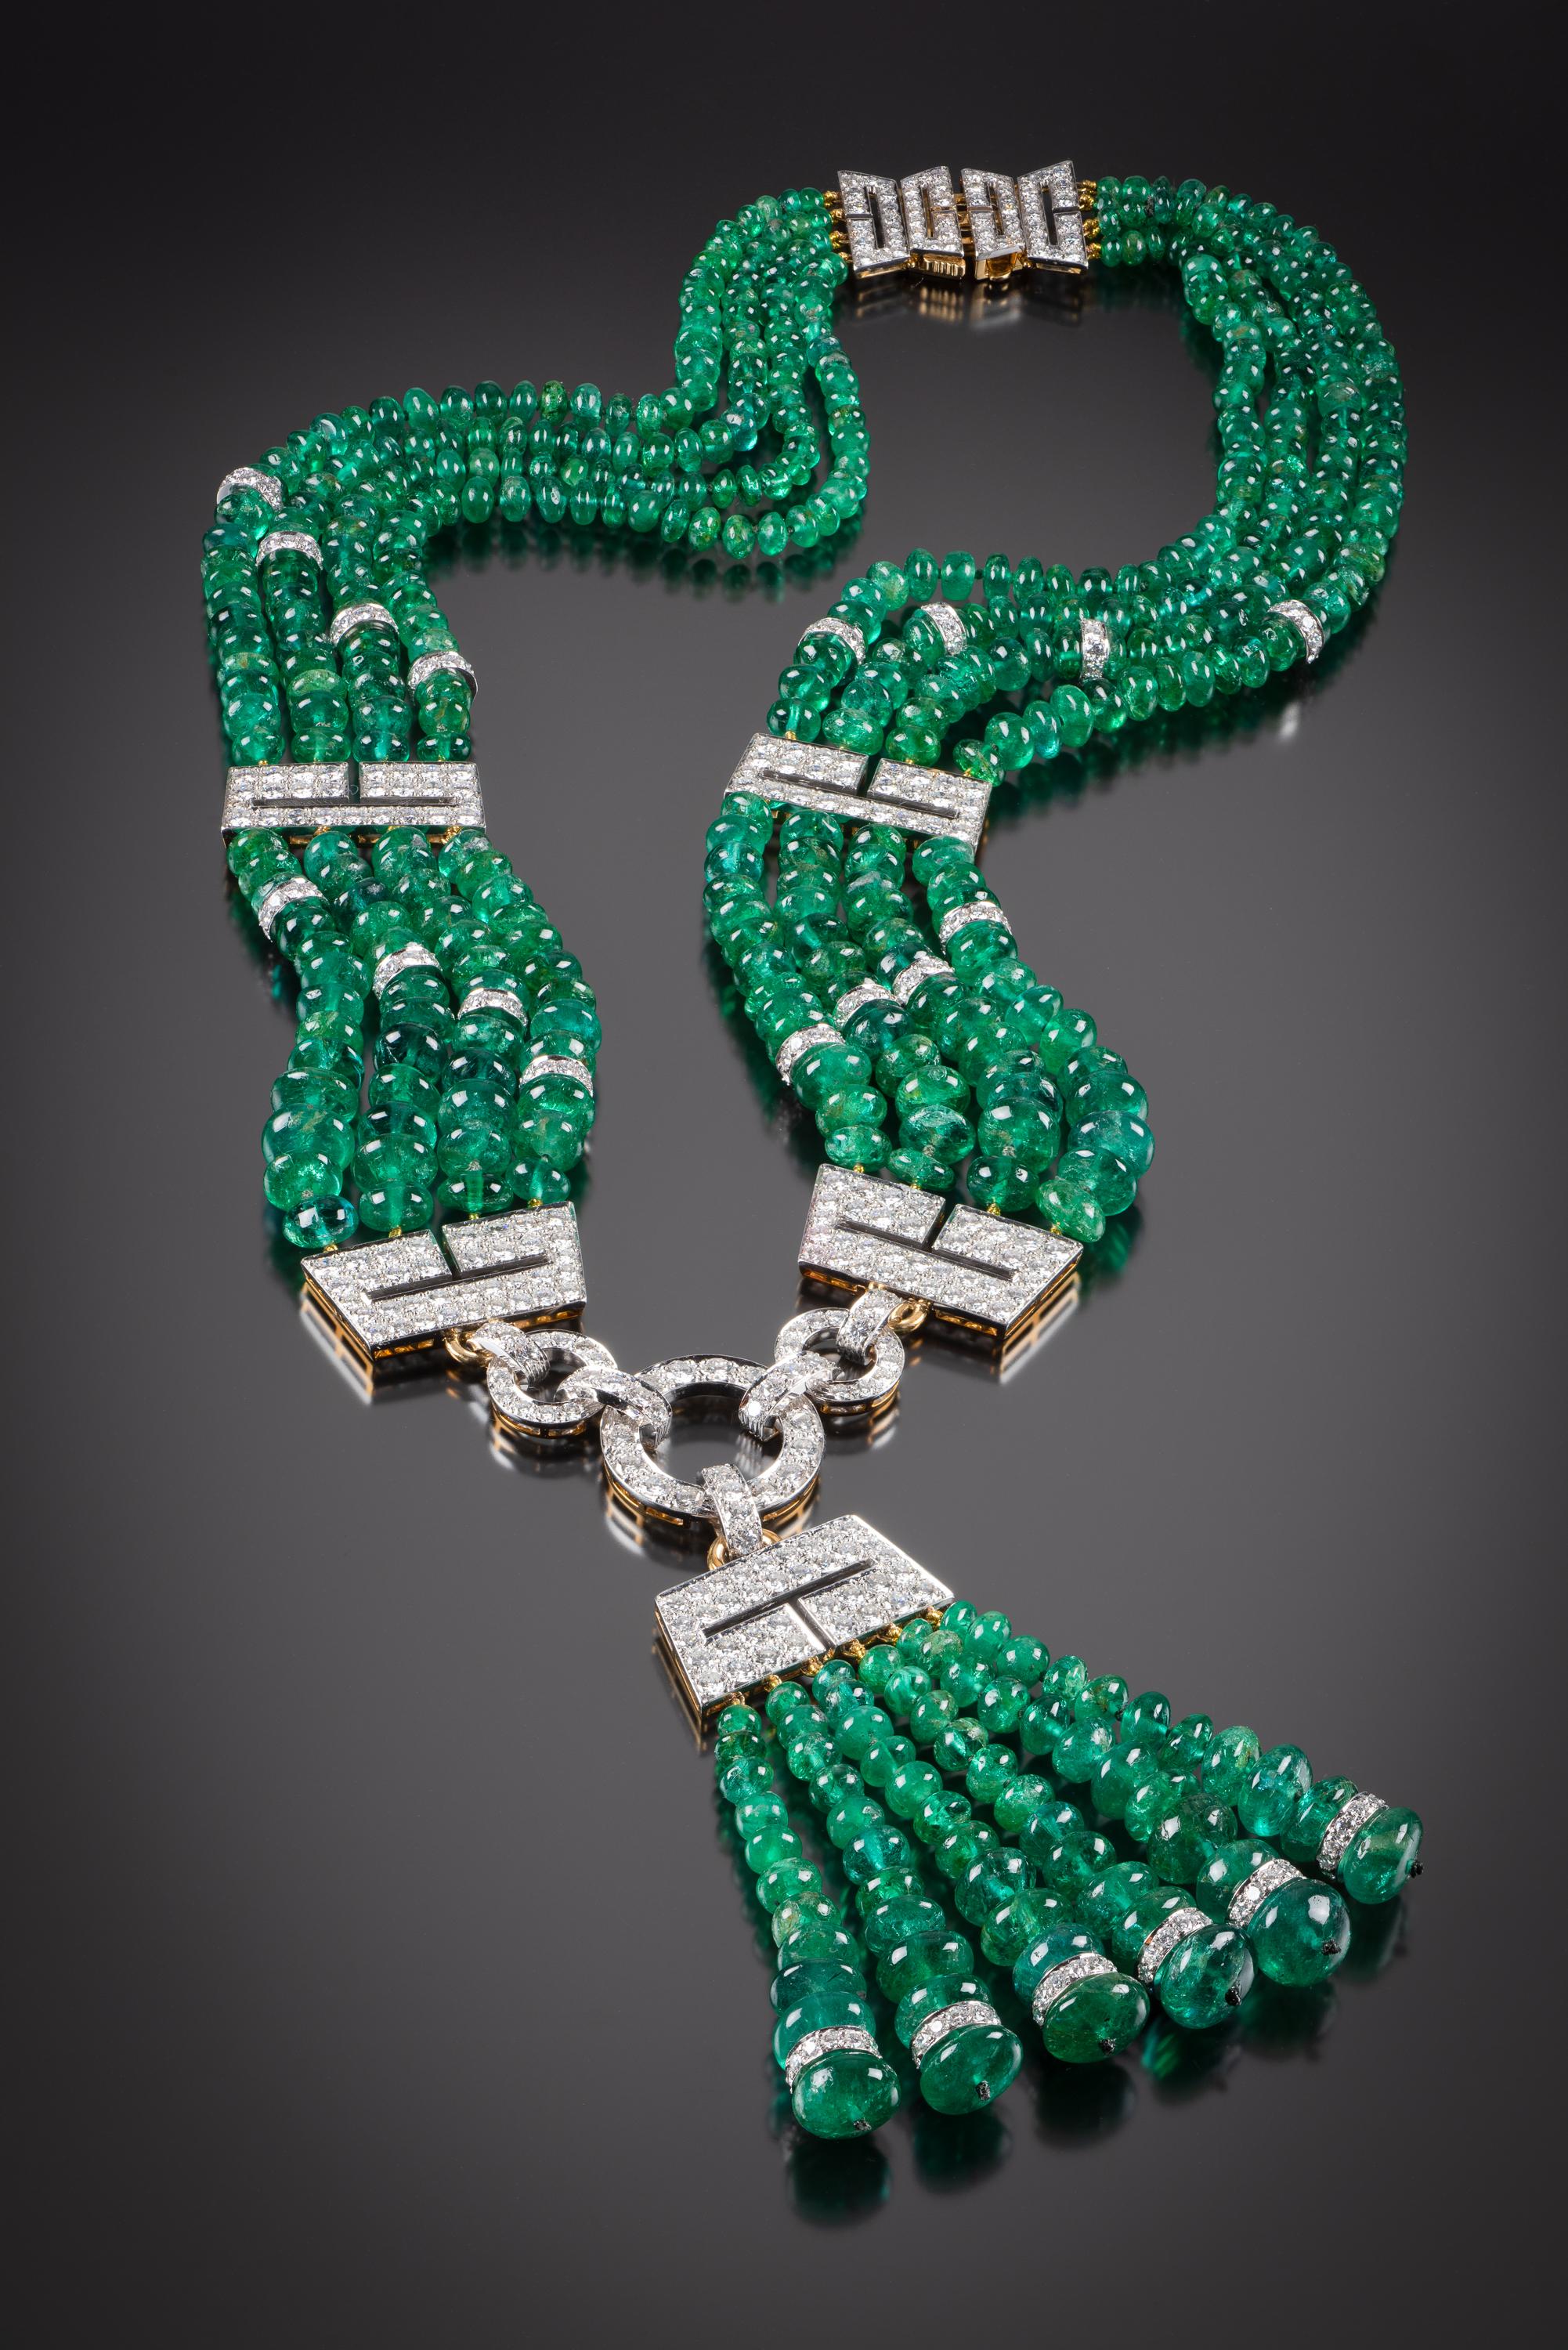 This magnificent David Webb emerald and diamond fringe necklace is a one-of-a-kind vintage treasure created for a longtime client of Webb’s. It is composed of four graduated rows of emerald beads interspersed by Art Deco-inspired openwork panels